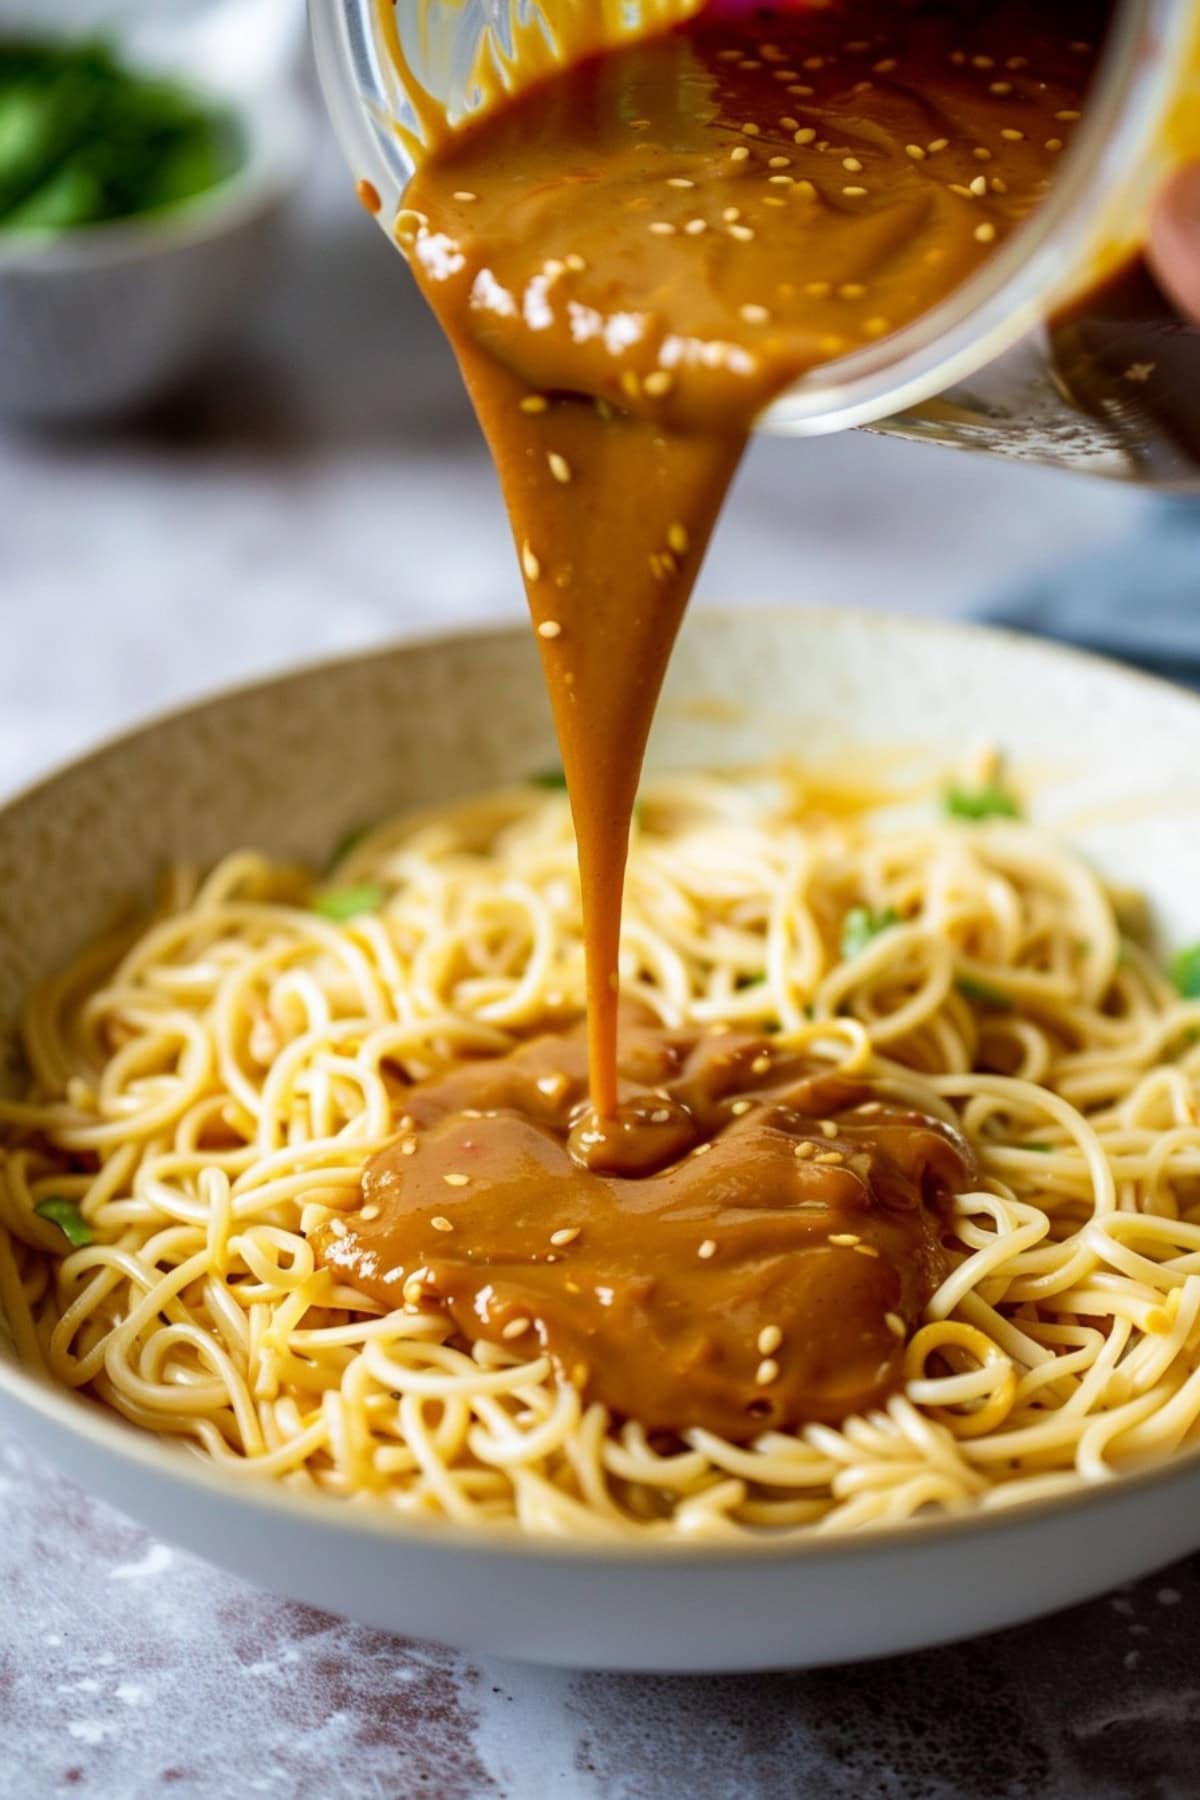 Homemade noodles featuring a peanut sauce poured into it.